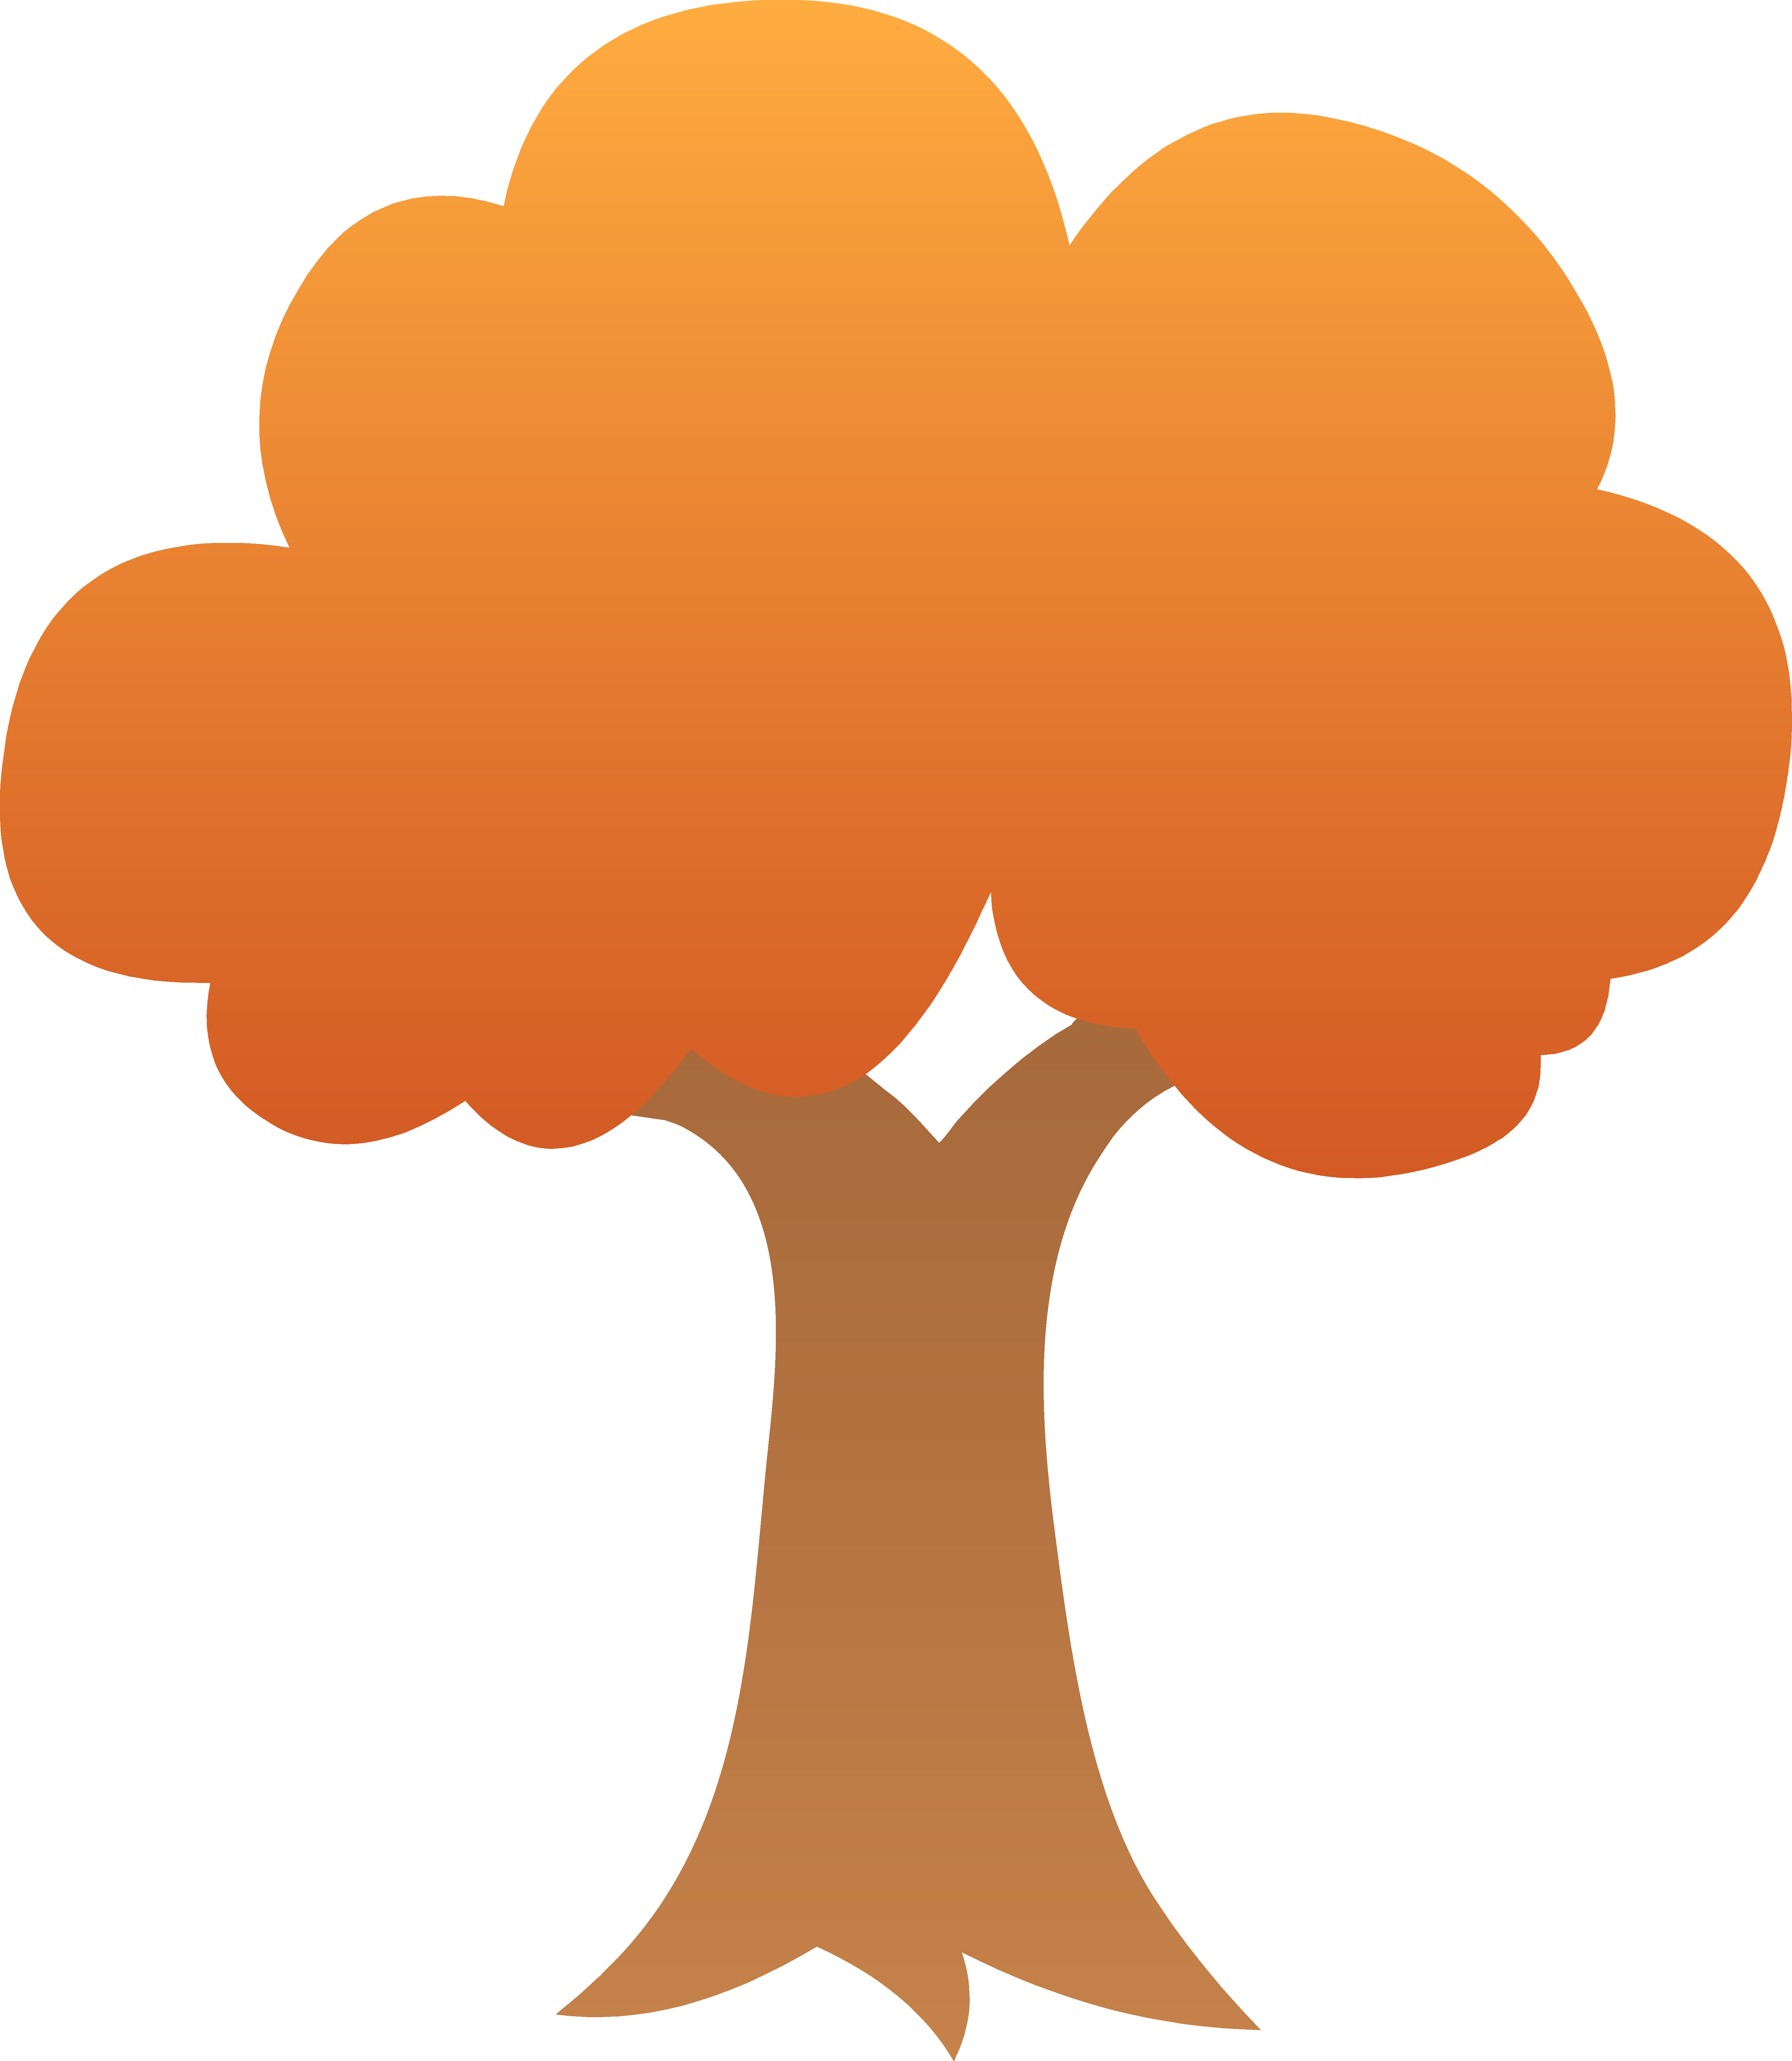 Free Fall Tree Clipart, Download Free Clip Art, Free Clip.